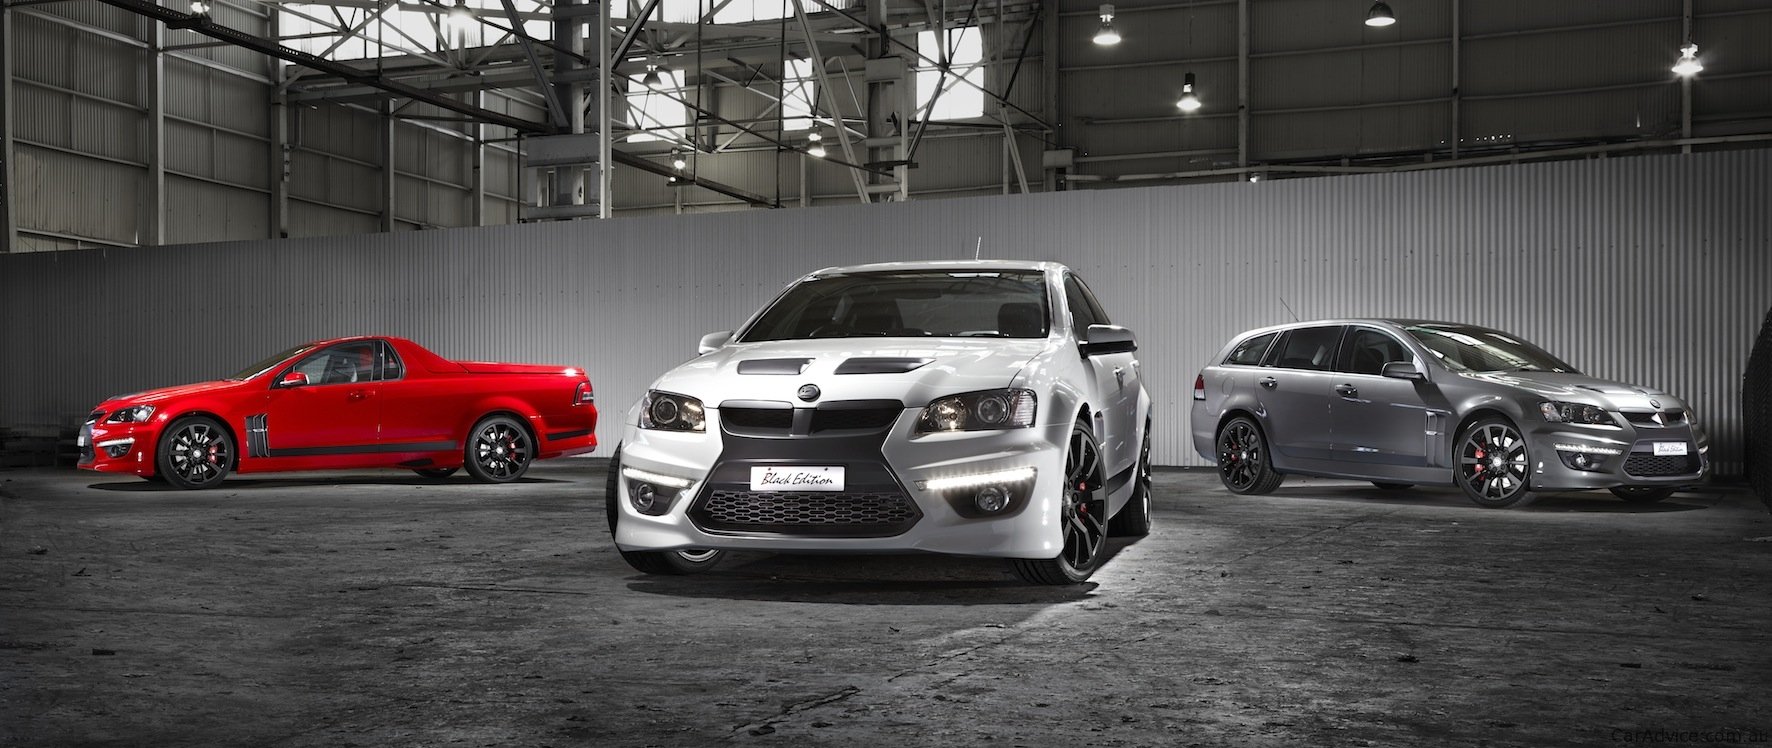 hsv maloo black edition review